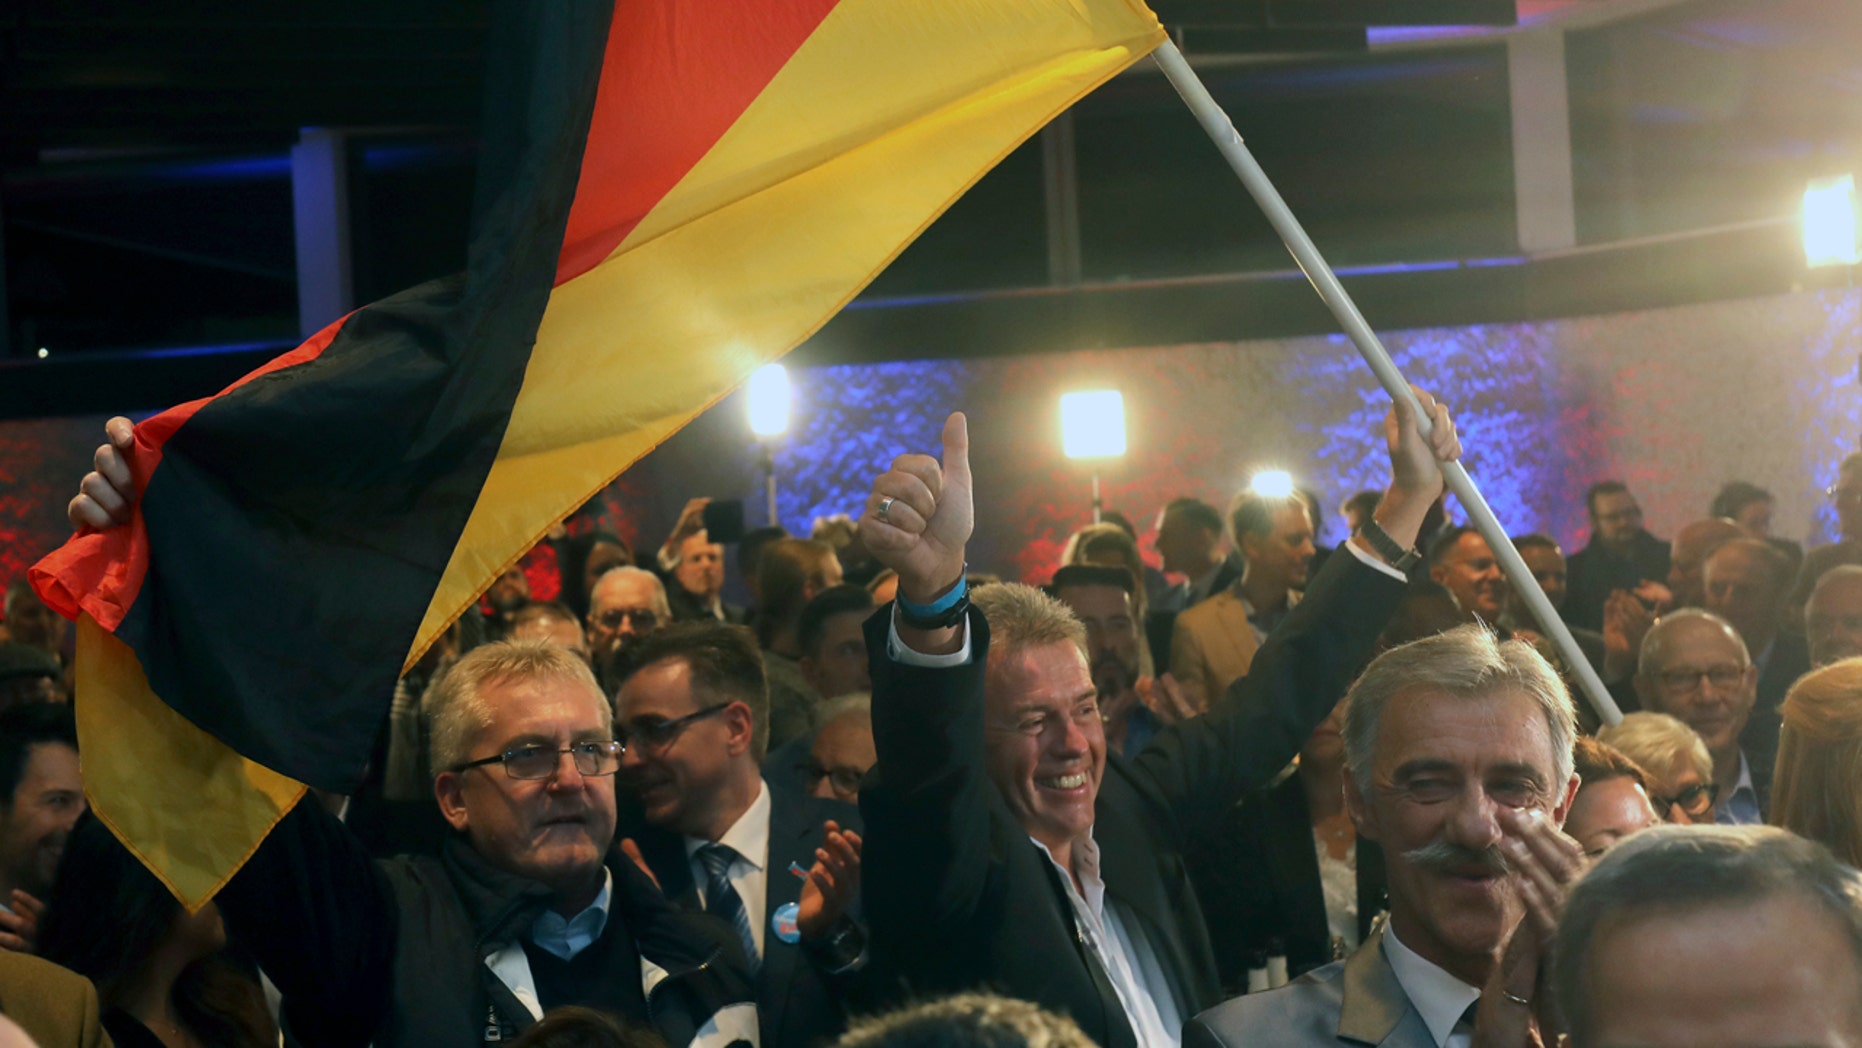 German spy agency to investigate anti-Islam, anti-immigration leading opposition party